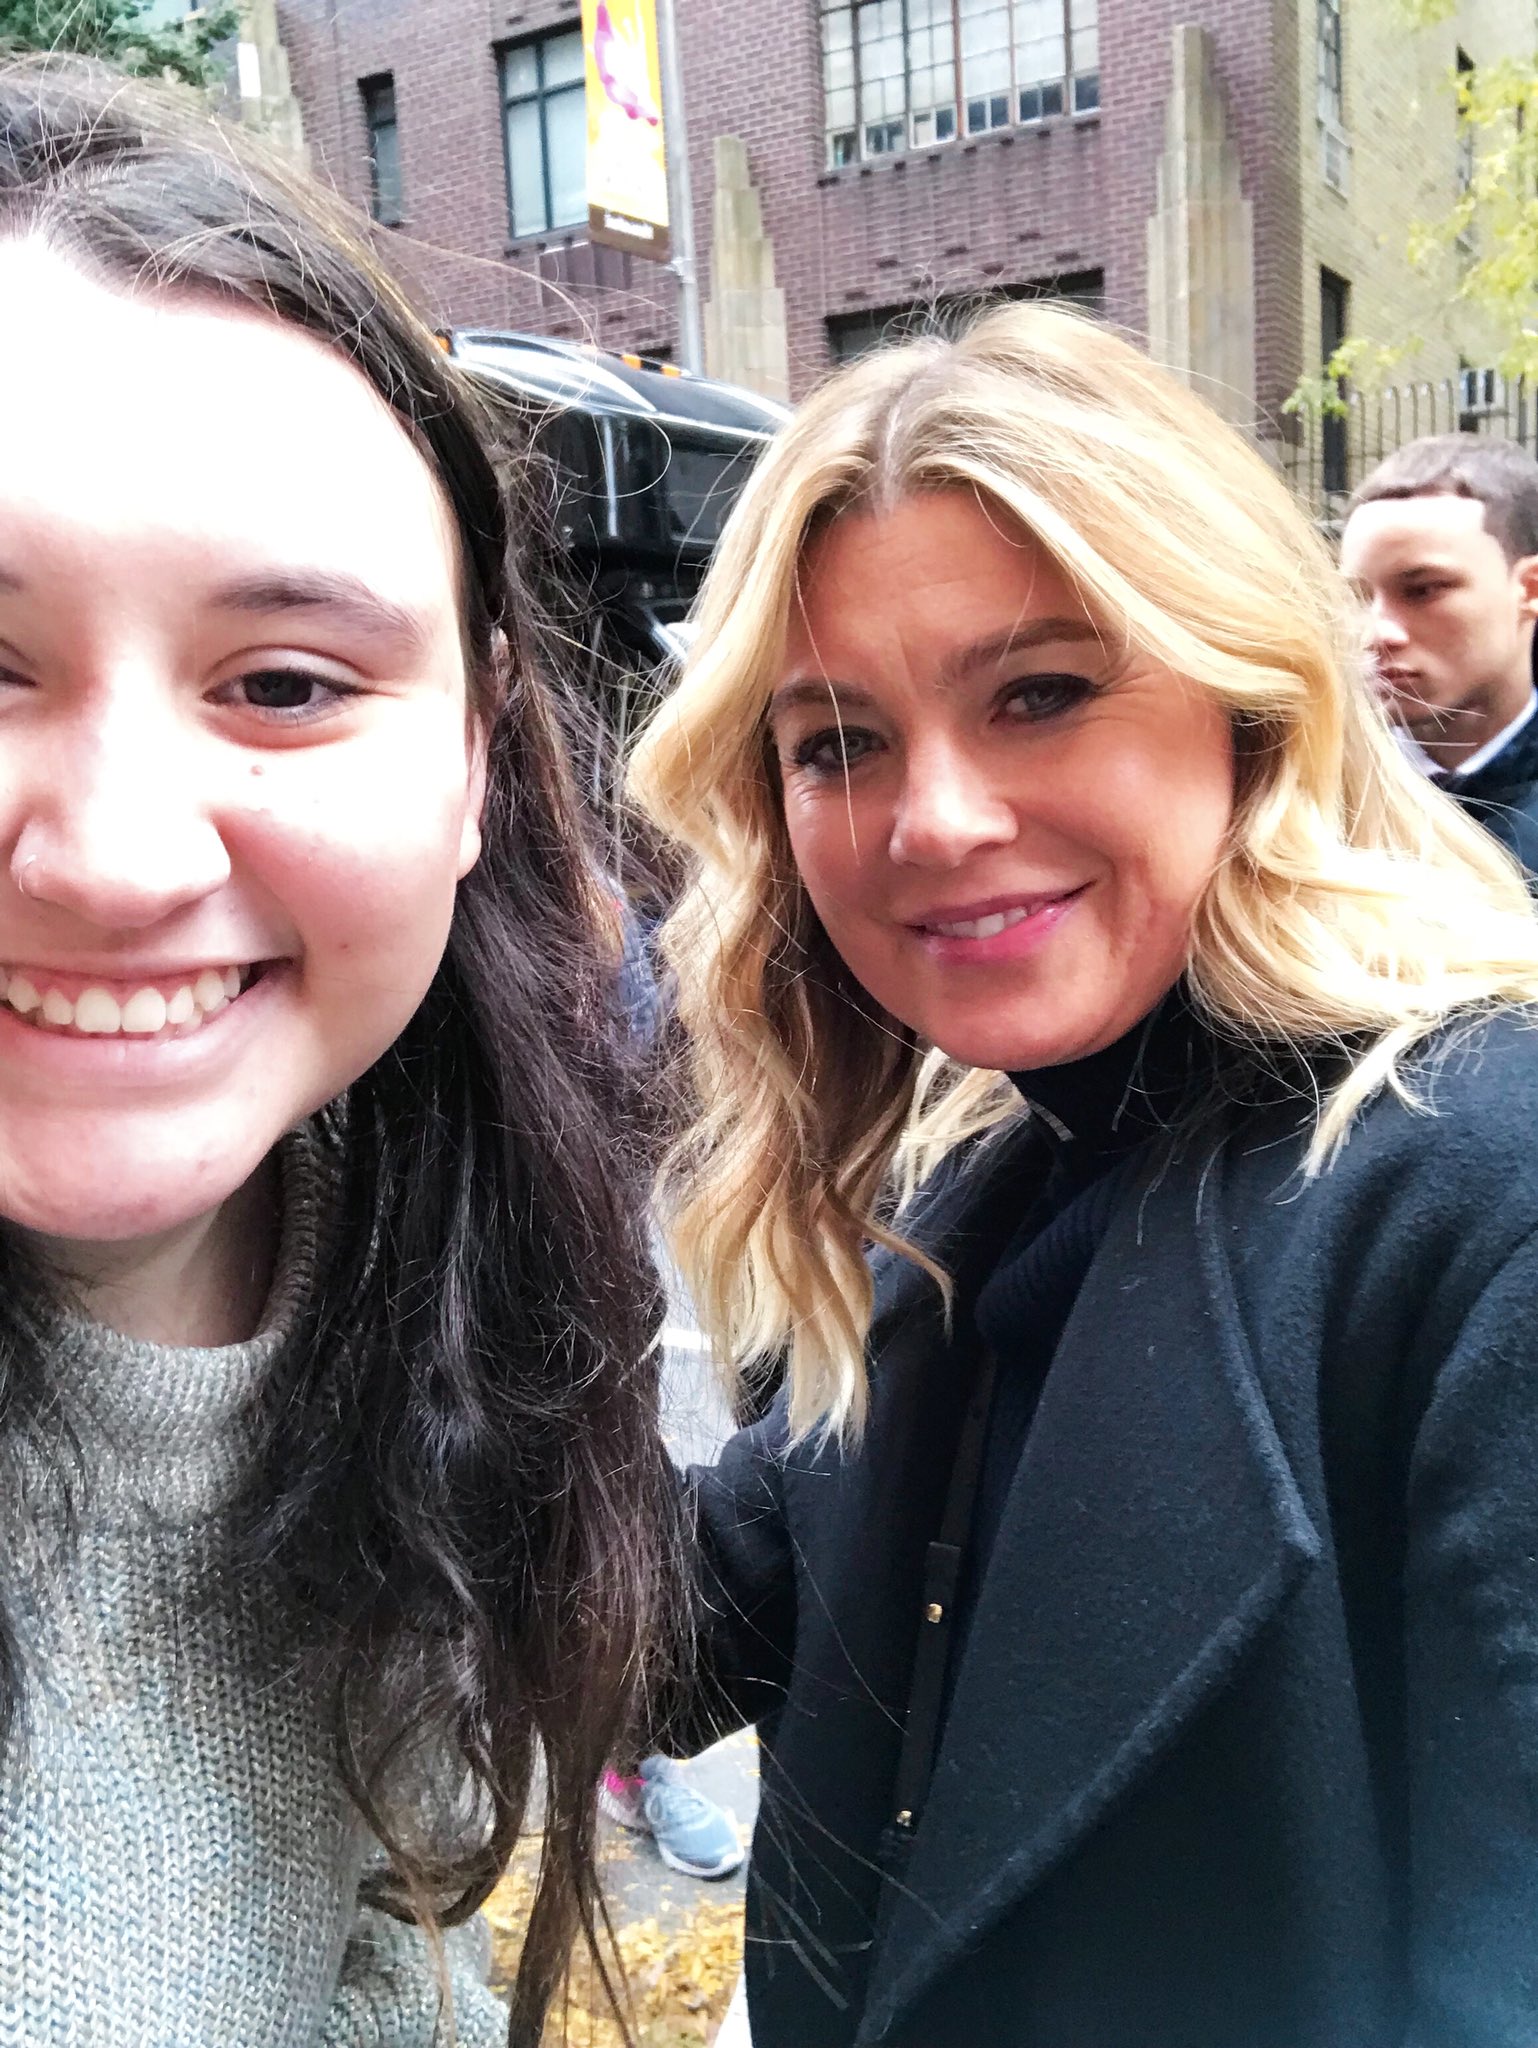 HAPPY BIRTHDAY ELLEN POMPEO!! I had the honor to wish her a happy birthday in person yesterday 